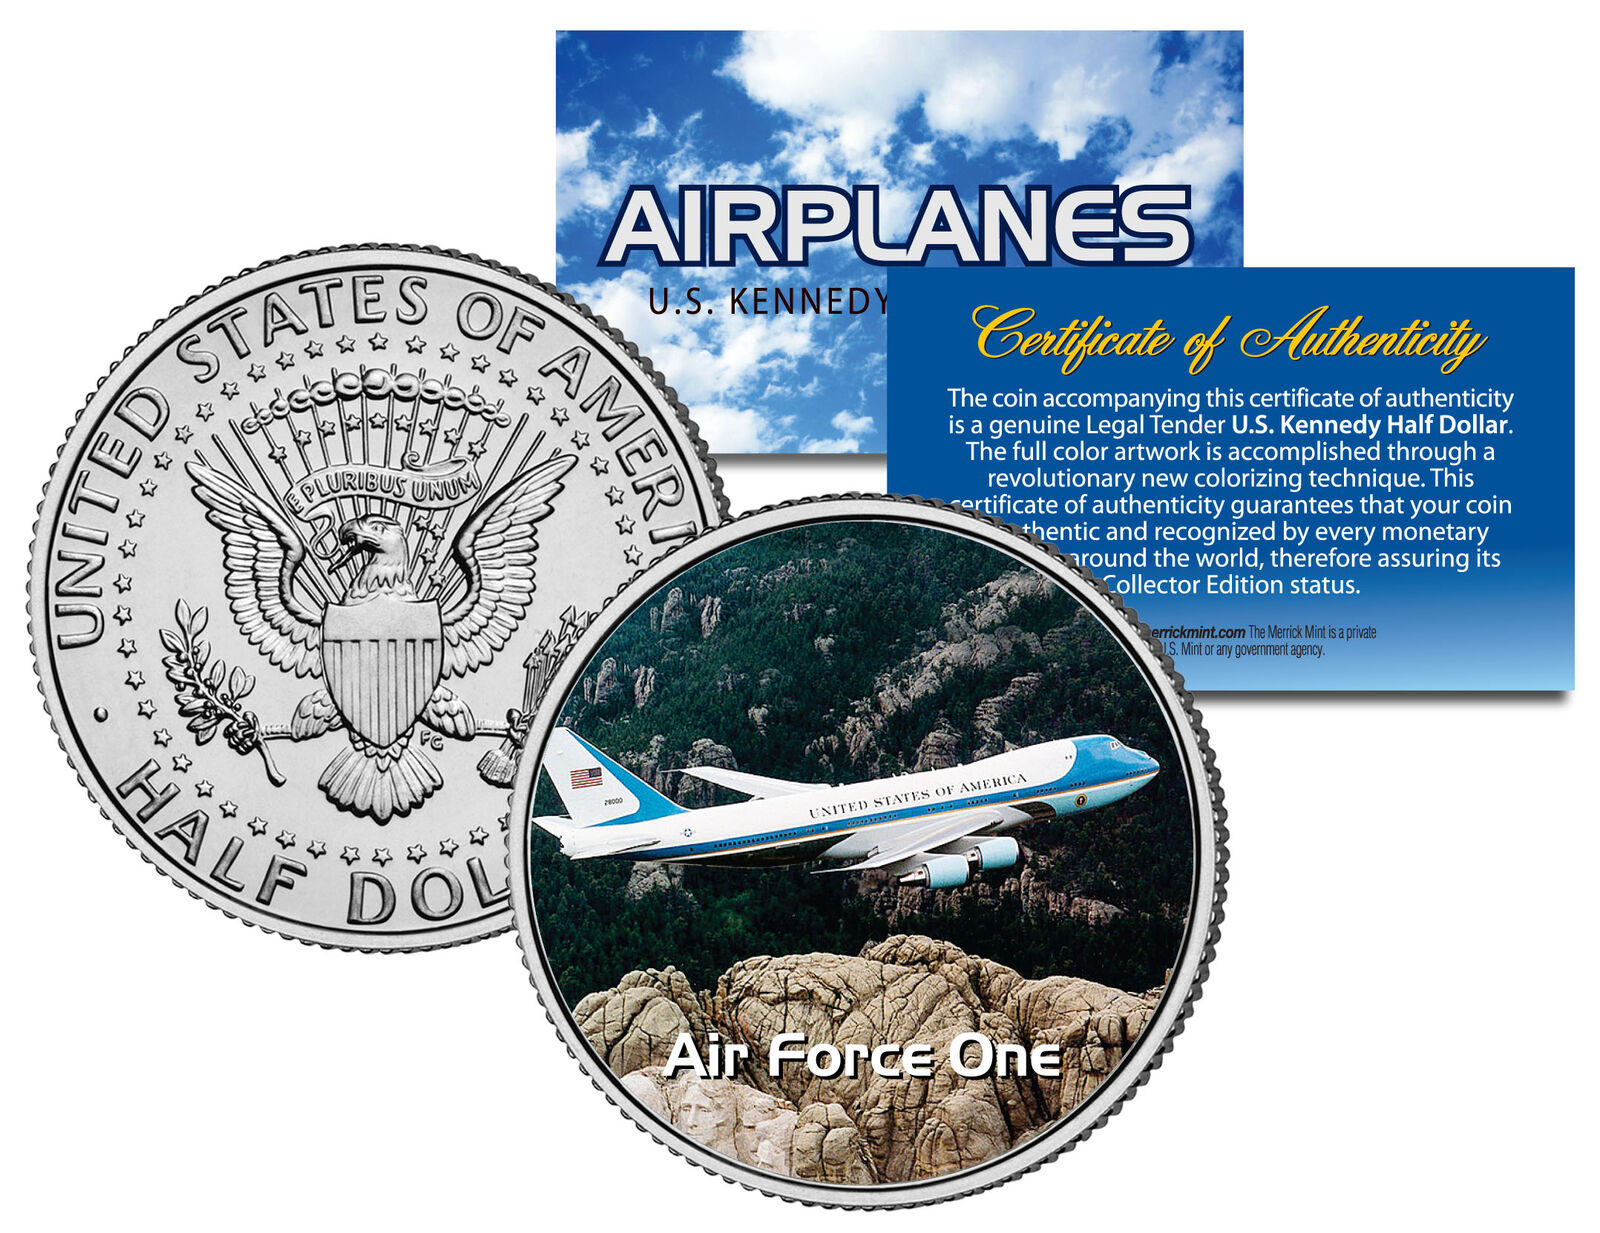 AIR FORCE ONE * Airplane Series * JFK Kennedy Half Dollar Colorized US Coin